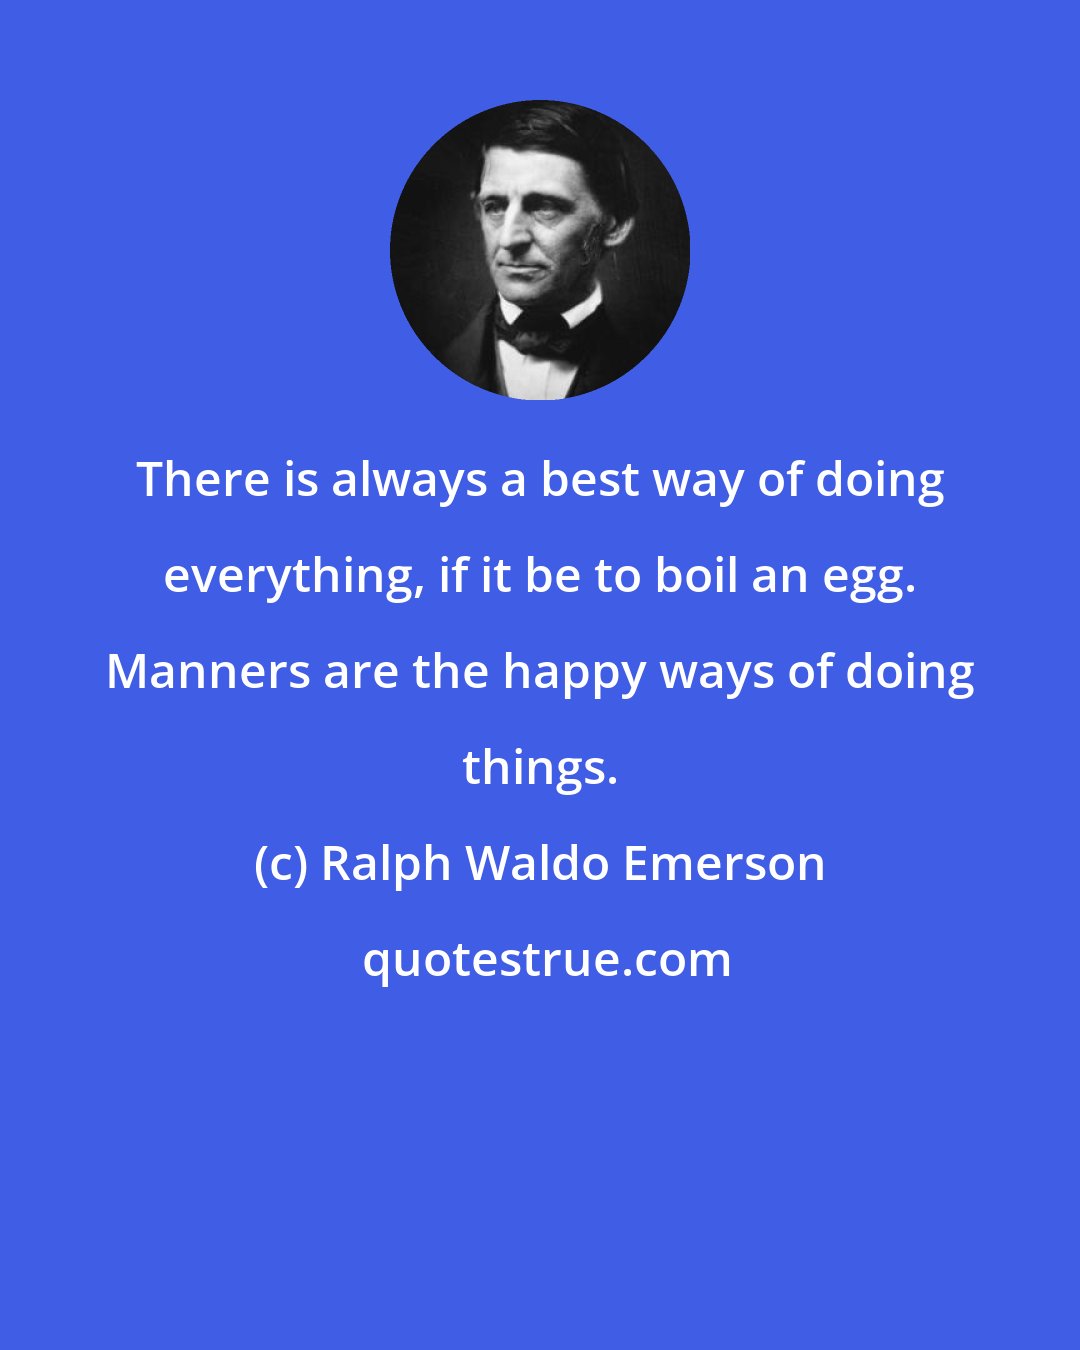 Ralph Waldo Emerson: There is always a best way of doing everything, if it be to boil an egg. Manners are the happy ways of doing things.